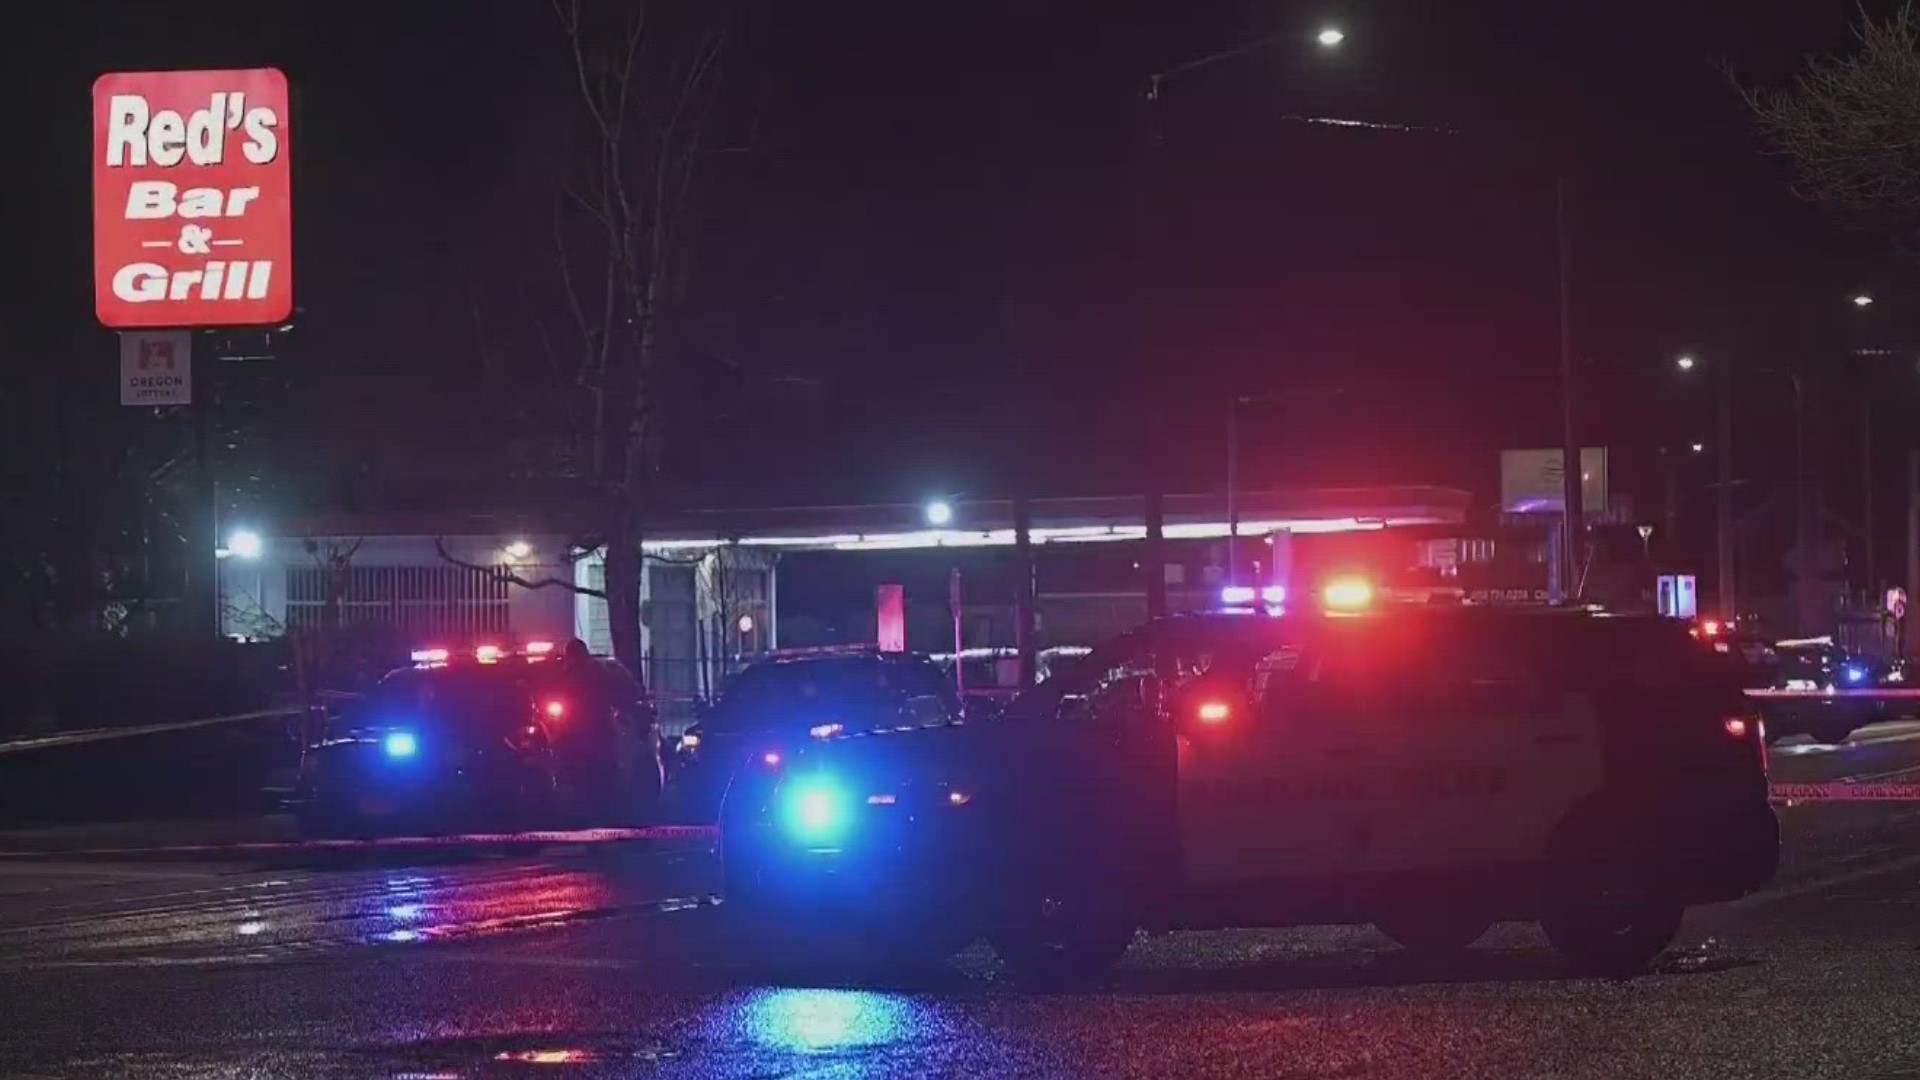 The shooting happened just after 11:30 p.m. Thursday outside Red's Bar and Grill in Southeast Portland, Oregon.